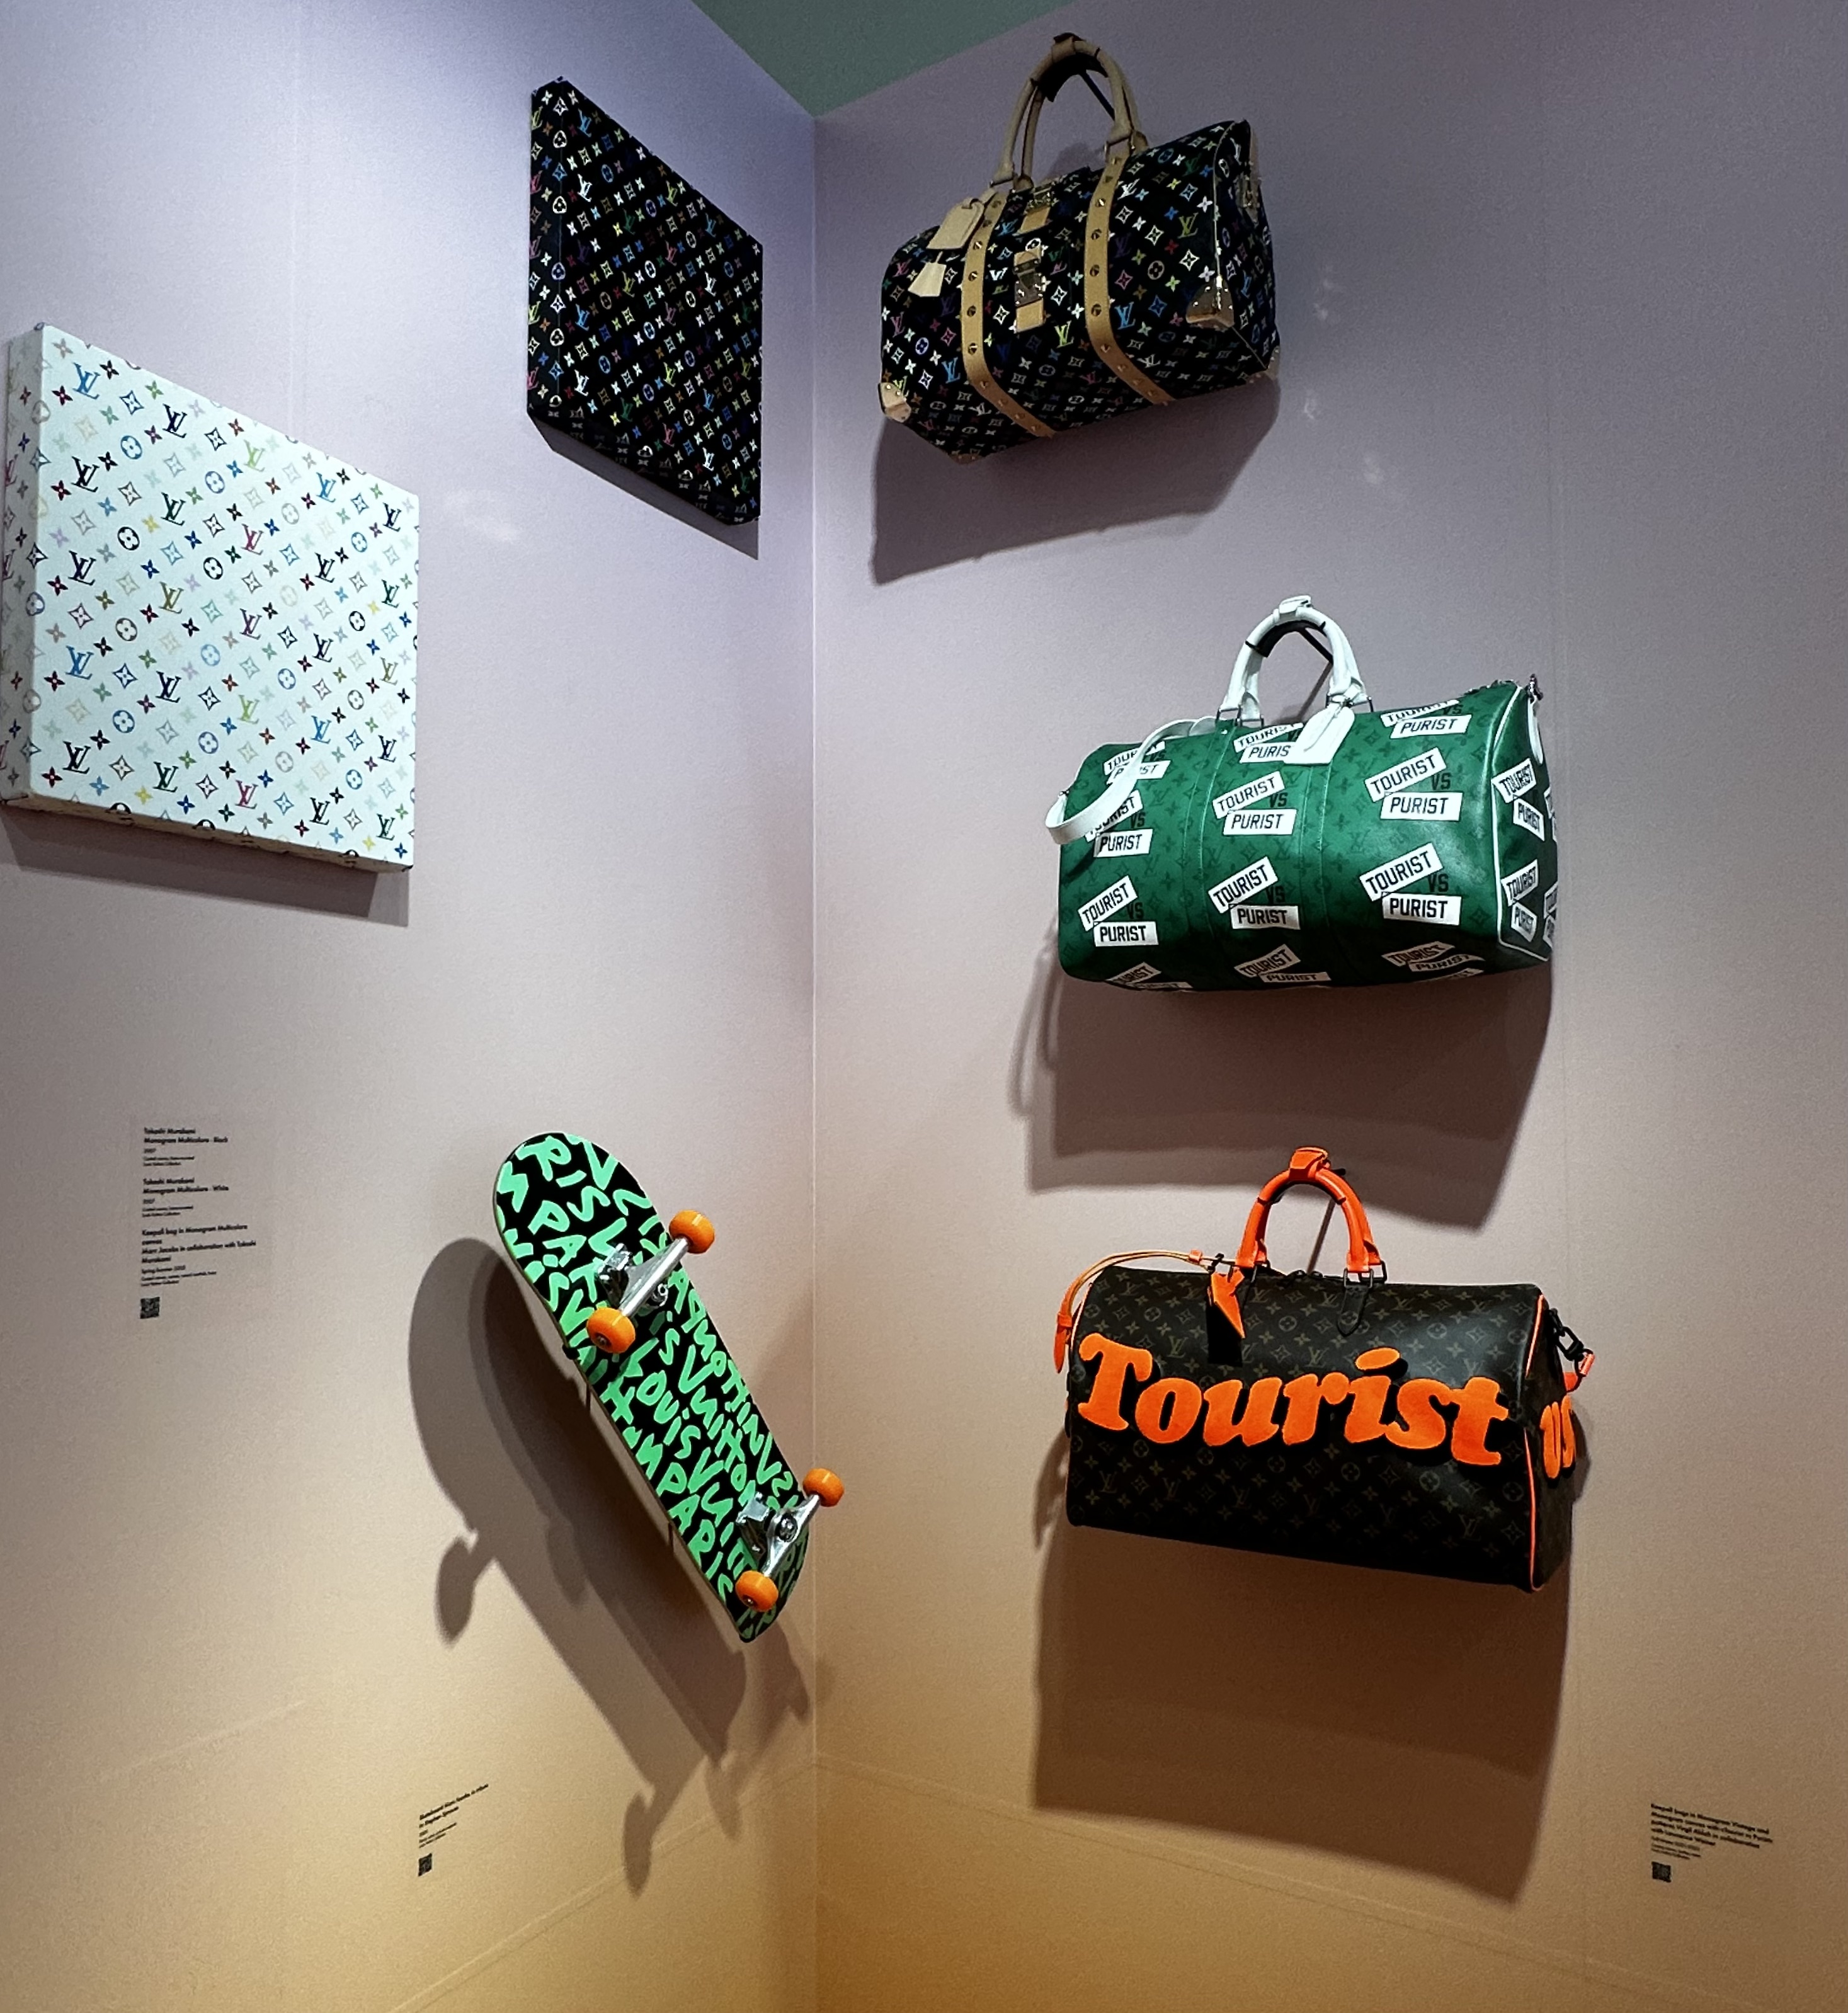 SPECIAL MIAMI ART WEEK – Louis Vuitton's new ArtyCapucines collection on  stage at Art Basel/Miami Beach. – Miami Niche